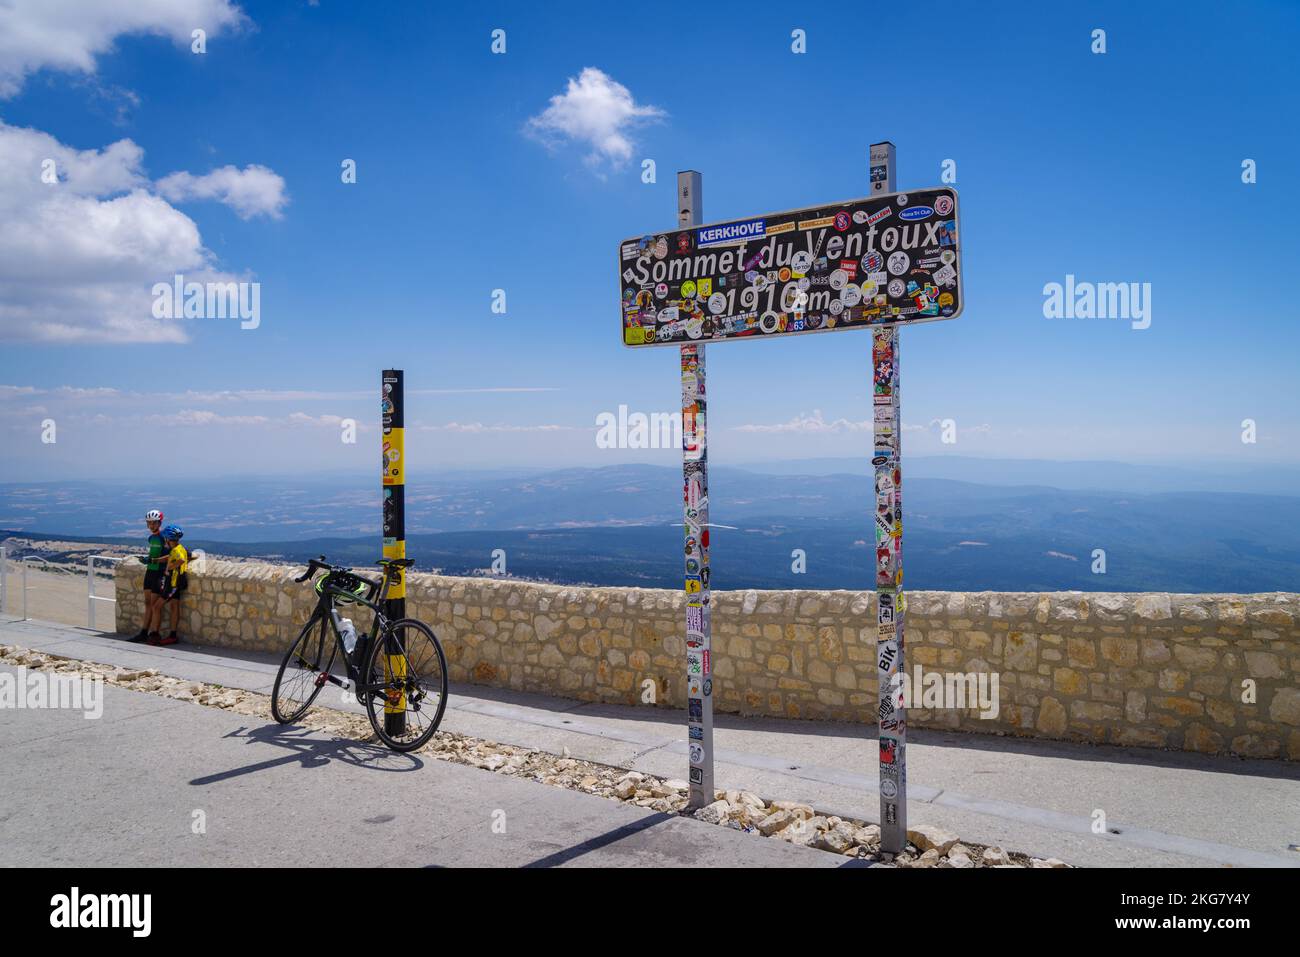 BEDOIN, FRANCE - AUGUST 7, 2022: Top of the Mont Ventoux. At 1,909 m (6,263 ft), it is the highest mountain in the region and has been nicknamed the ' Stock Photo